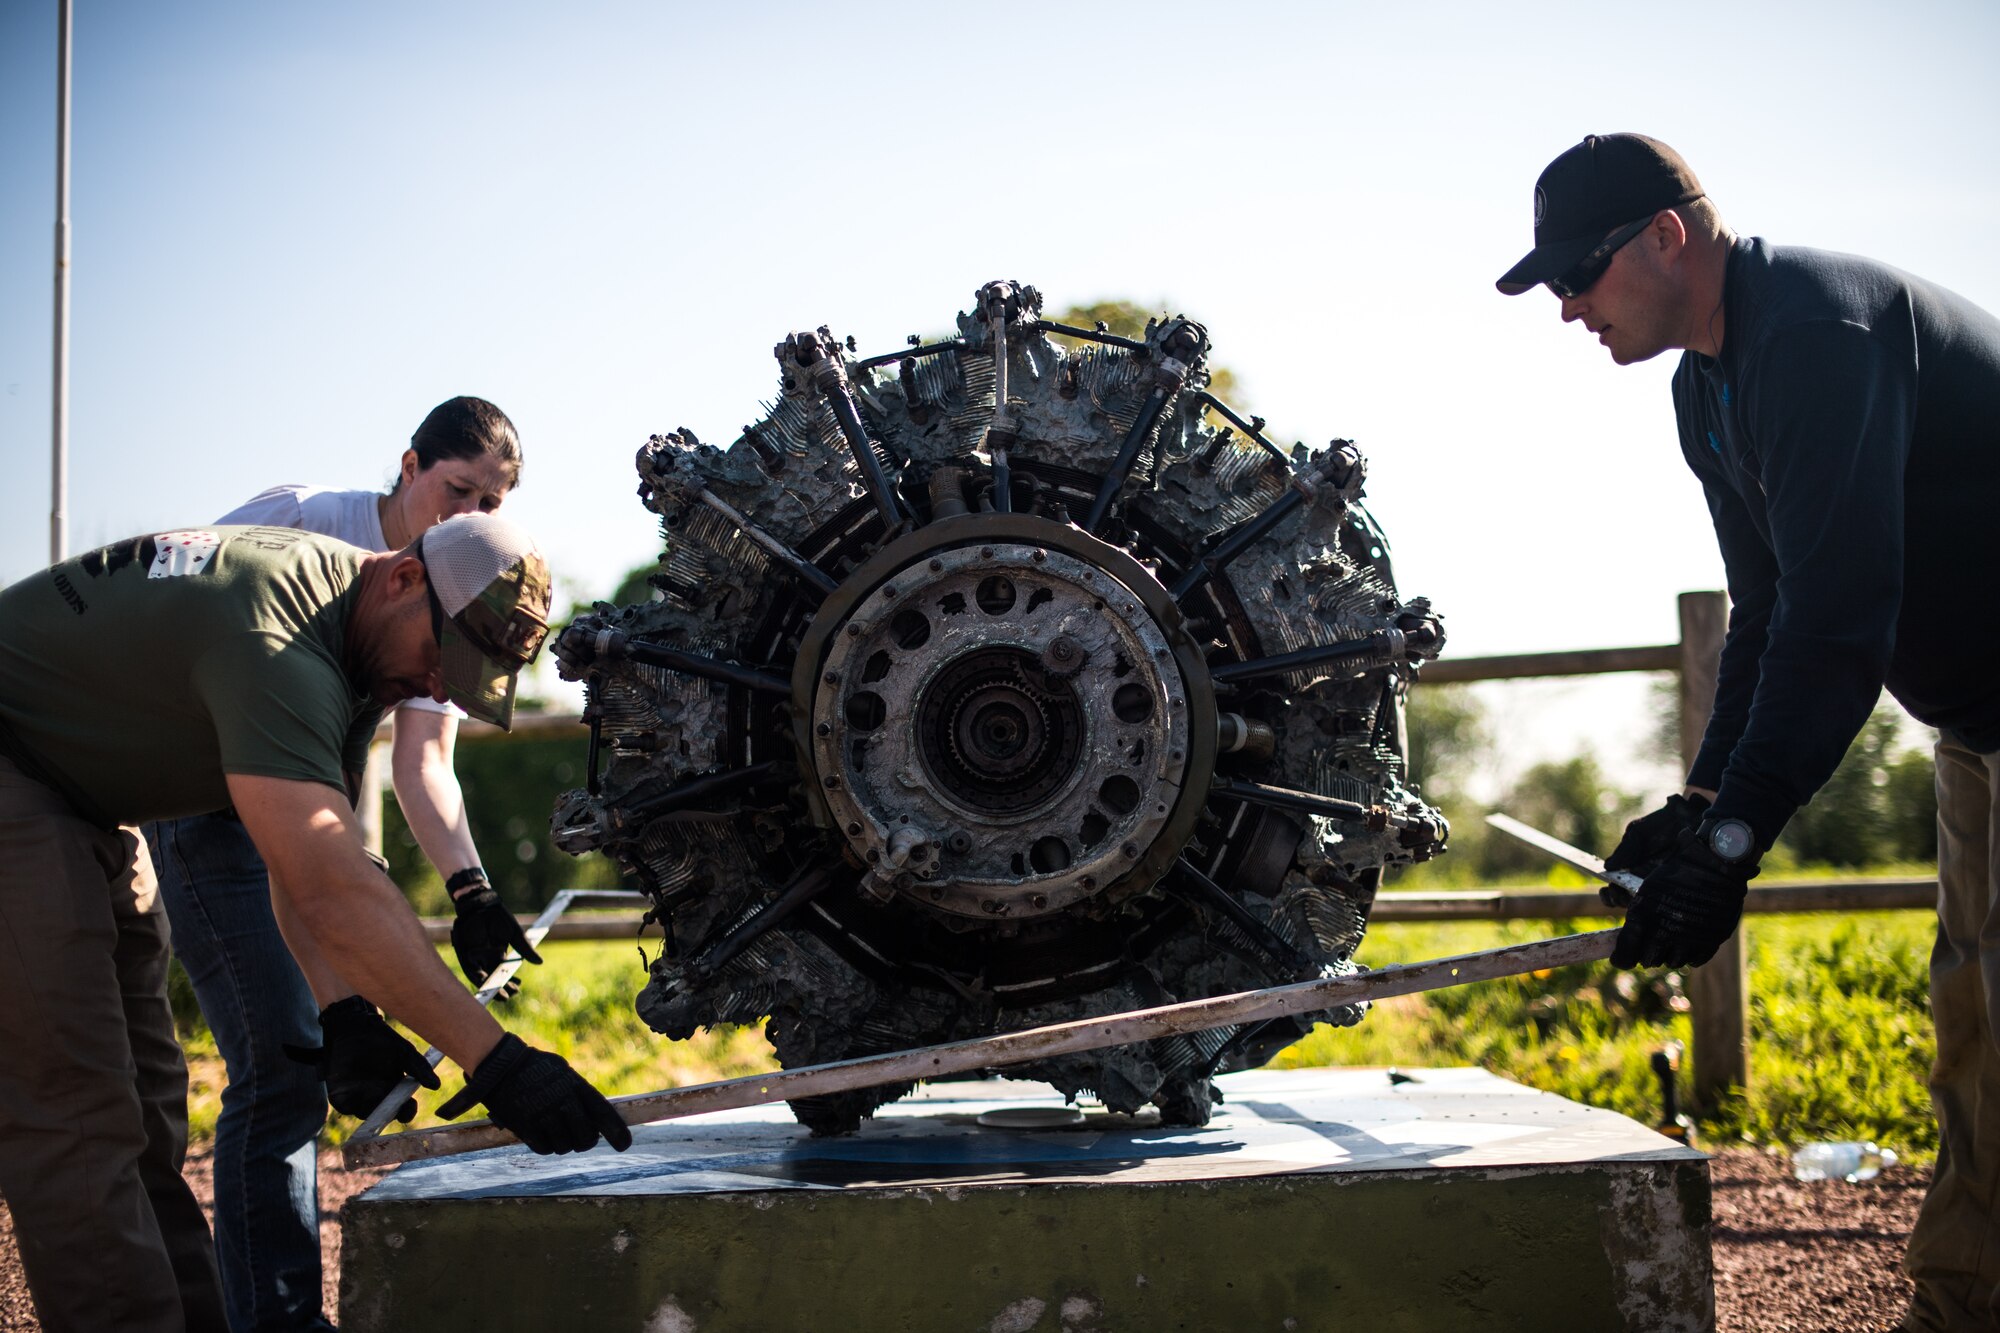 Airmen assigned to the 435th Construction Training Squadron lower a metal frame onto the pedestal of a WWII aircraft display at a memorial in Picauville, France, April 30, 2019. The frame was used to anchor the new display case so the engine could be protected from weather. (U.S. Air Force photo by Staff Sgt. Devin Boyer)